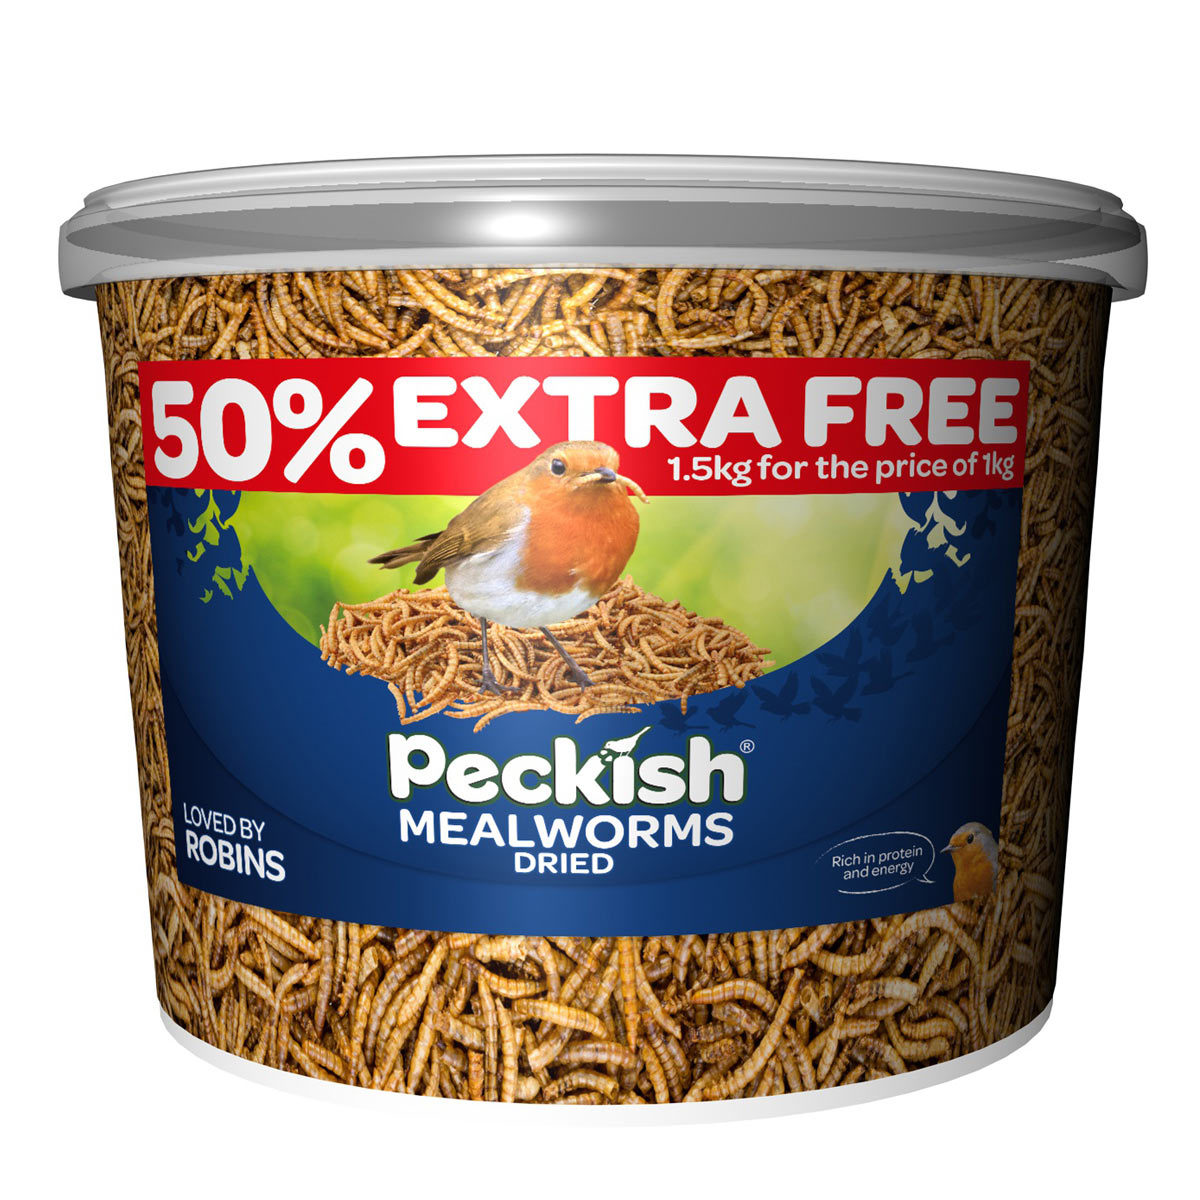 Peckish Dried Mealworms, 1 kg + 50% Extra Free